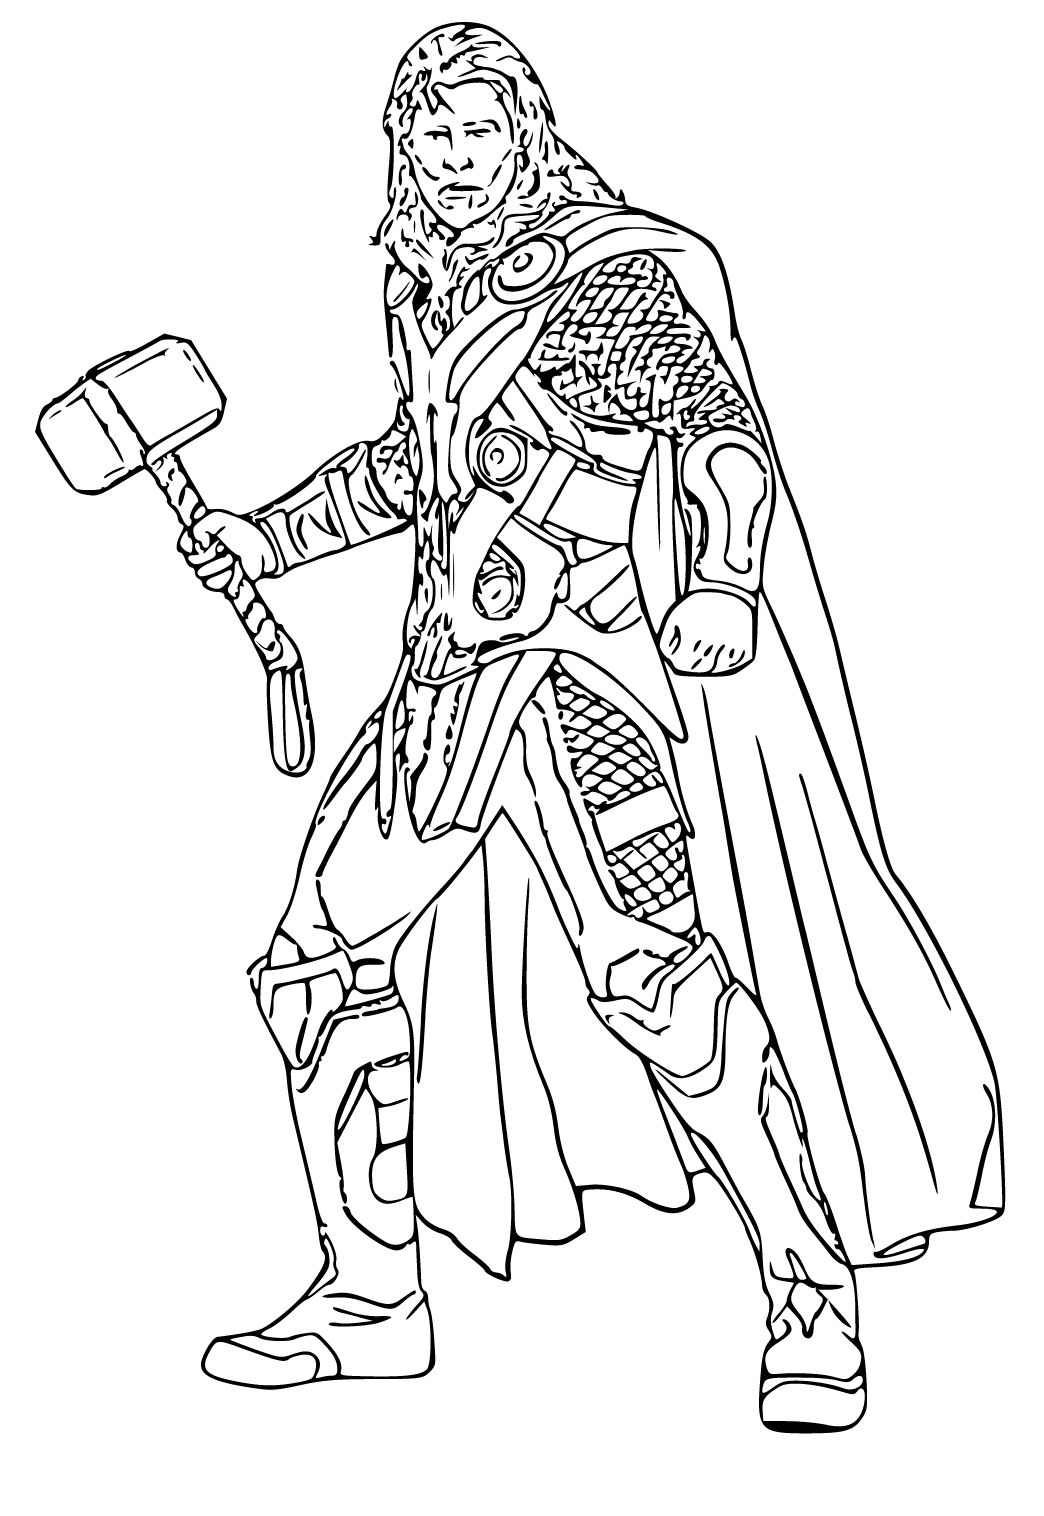 Free printable thor hero coloring page for adults and kids